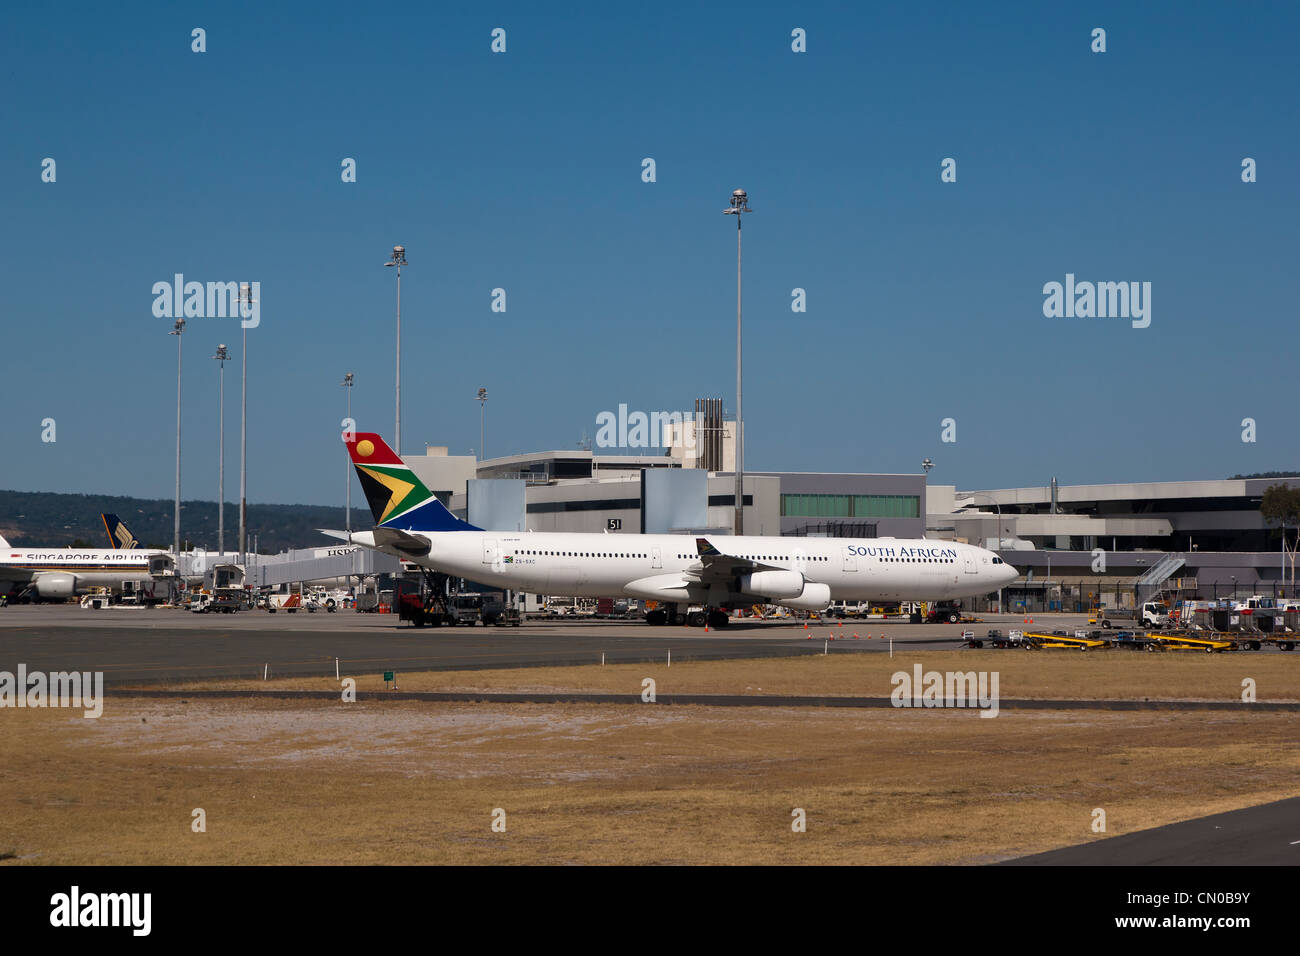 South Africa Airlines Plan Parked at Perth Airport Stock Photo